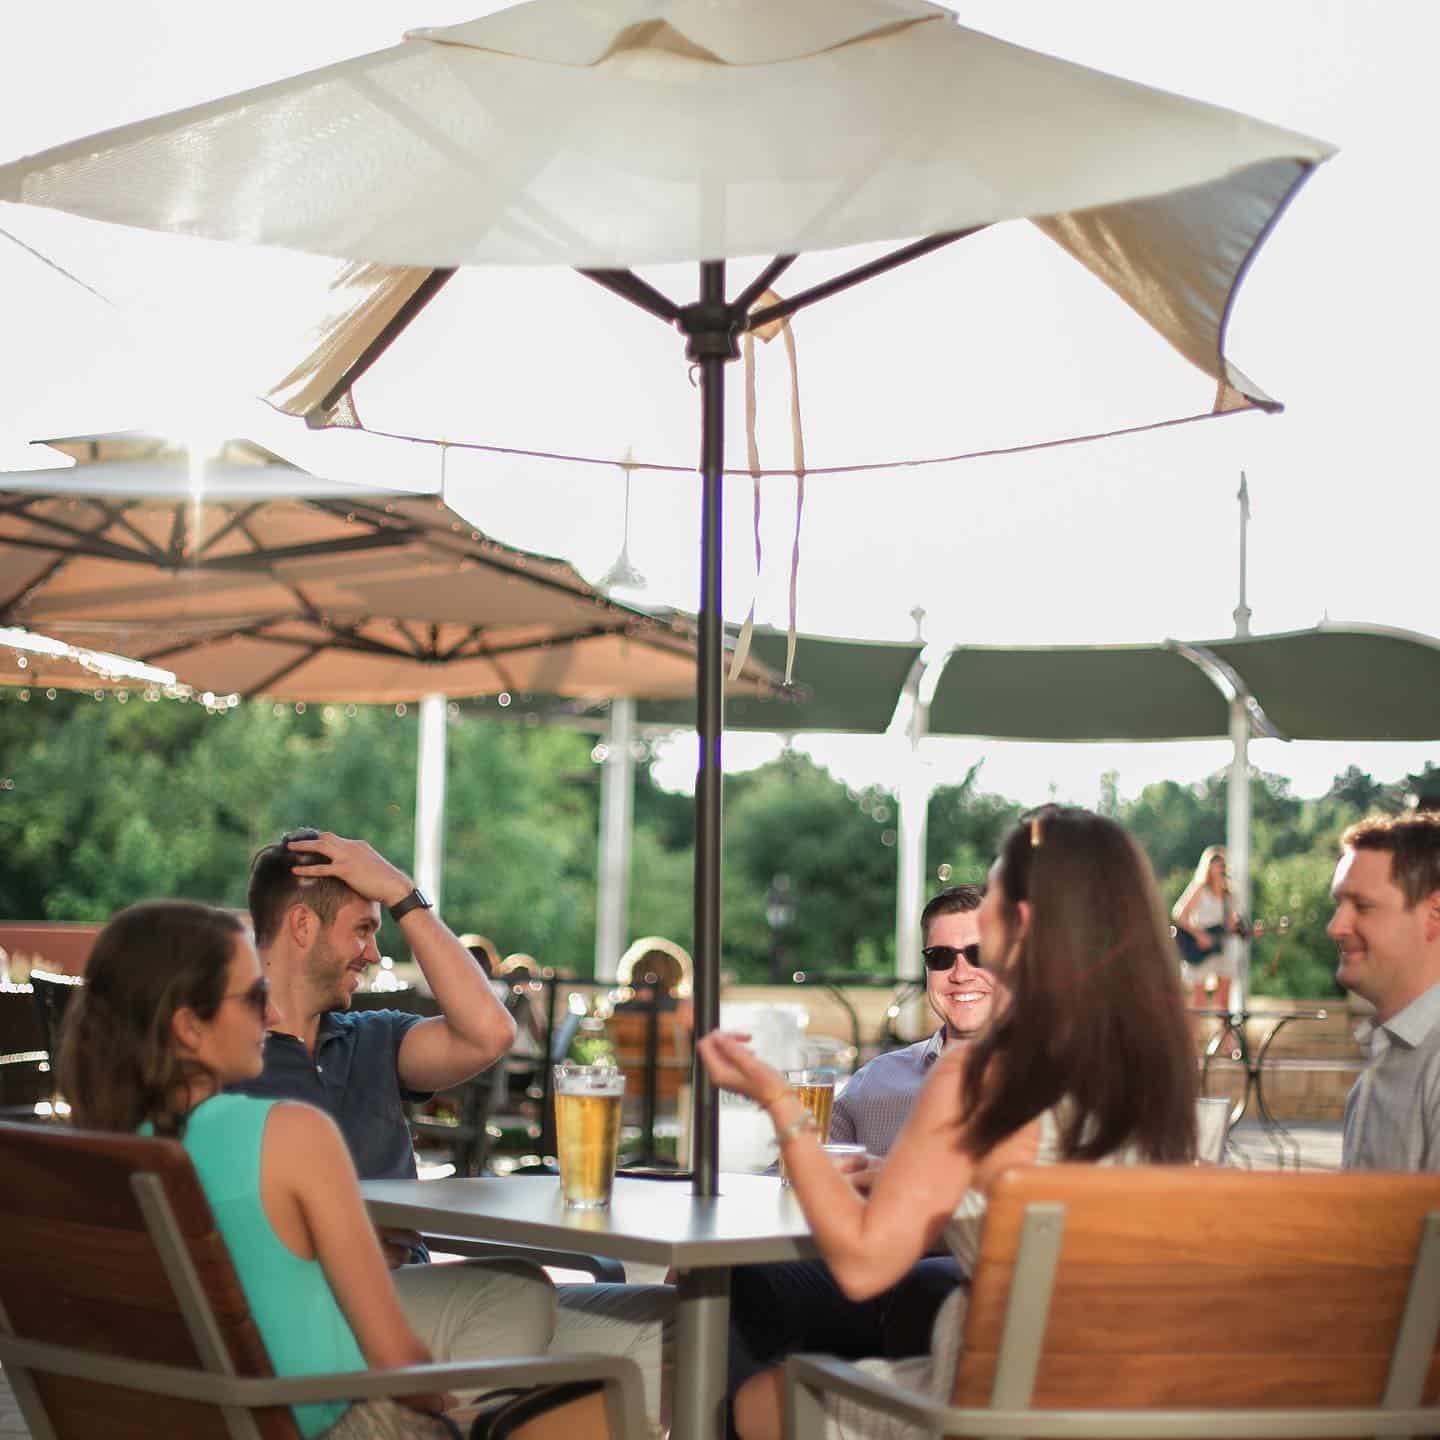 Shop, eat, hang and work in one spot  Our patio area officially has complimentary wifi so you can enjoy the views and the beautiful weather while staying connected.